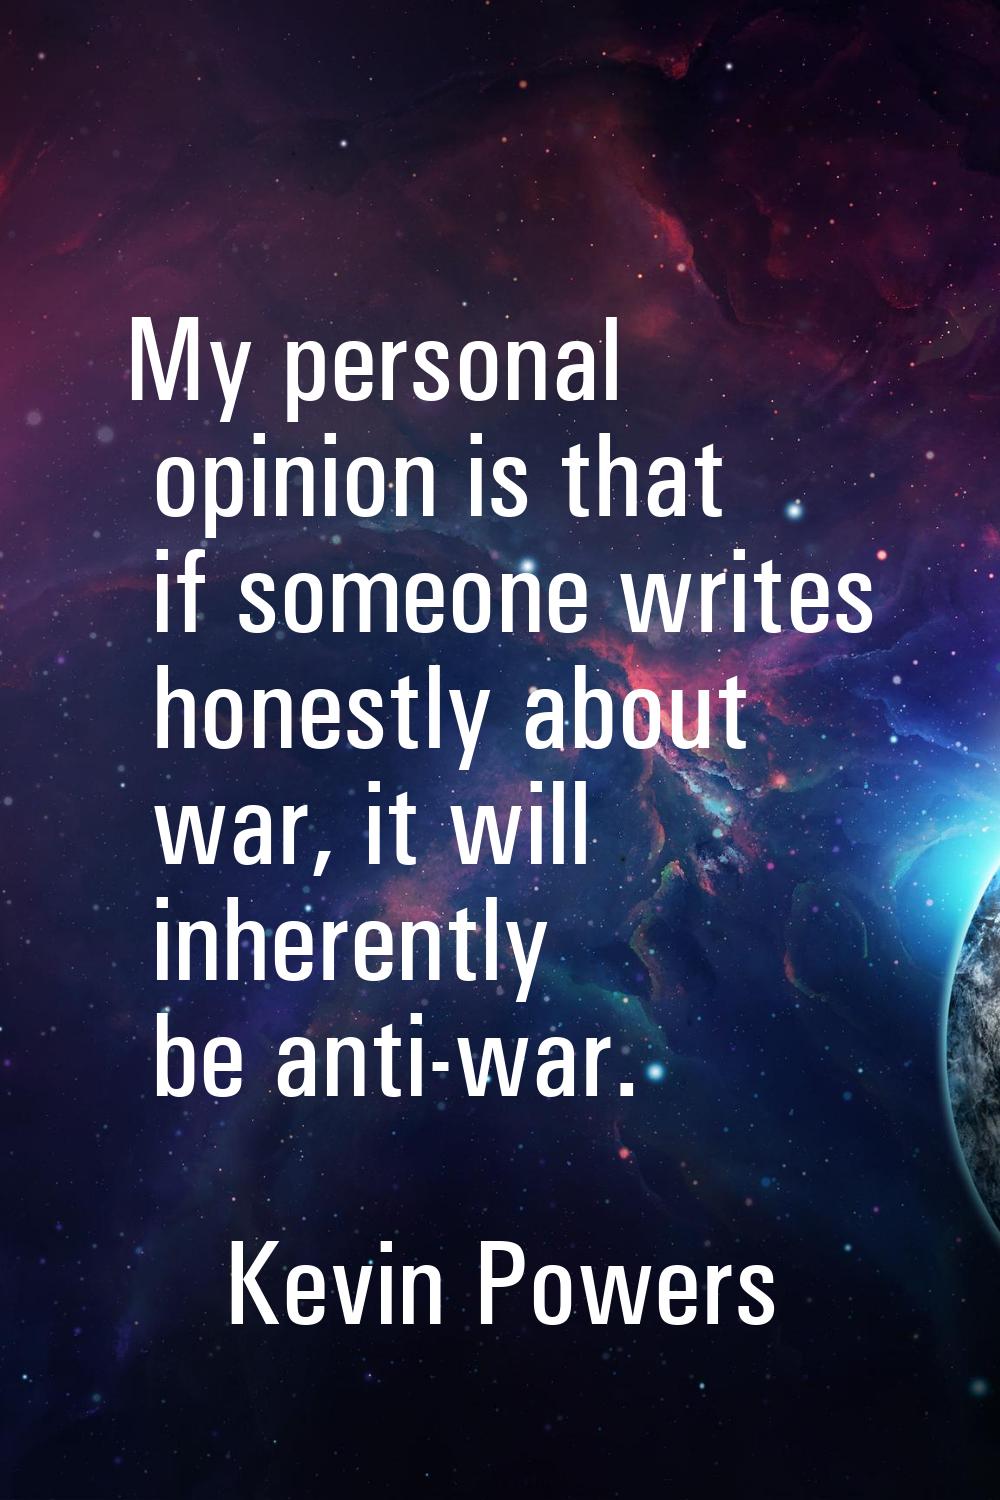 My personal opinion is that if someone writes honestly about war, it will inherently be anti-war.